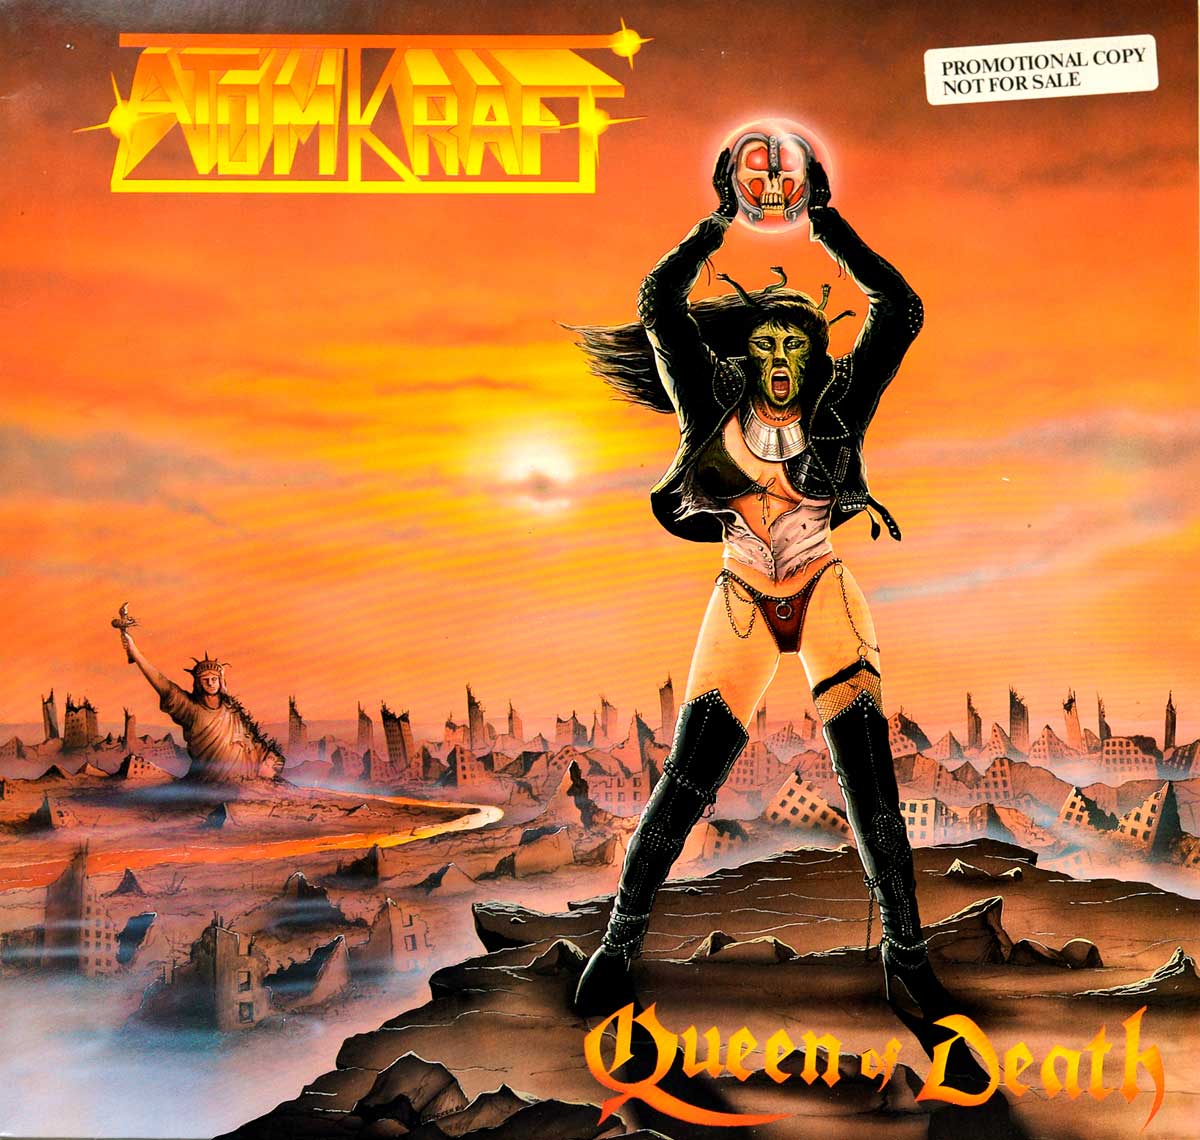 High Resolution Photo Album Front Cover of ATOMKRAFT - Queen of Death ( Netherlands Release ) https://vinyl-records.nl